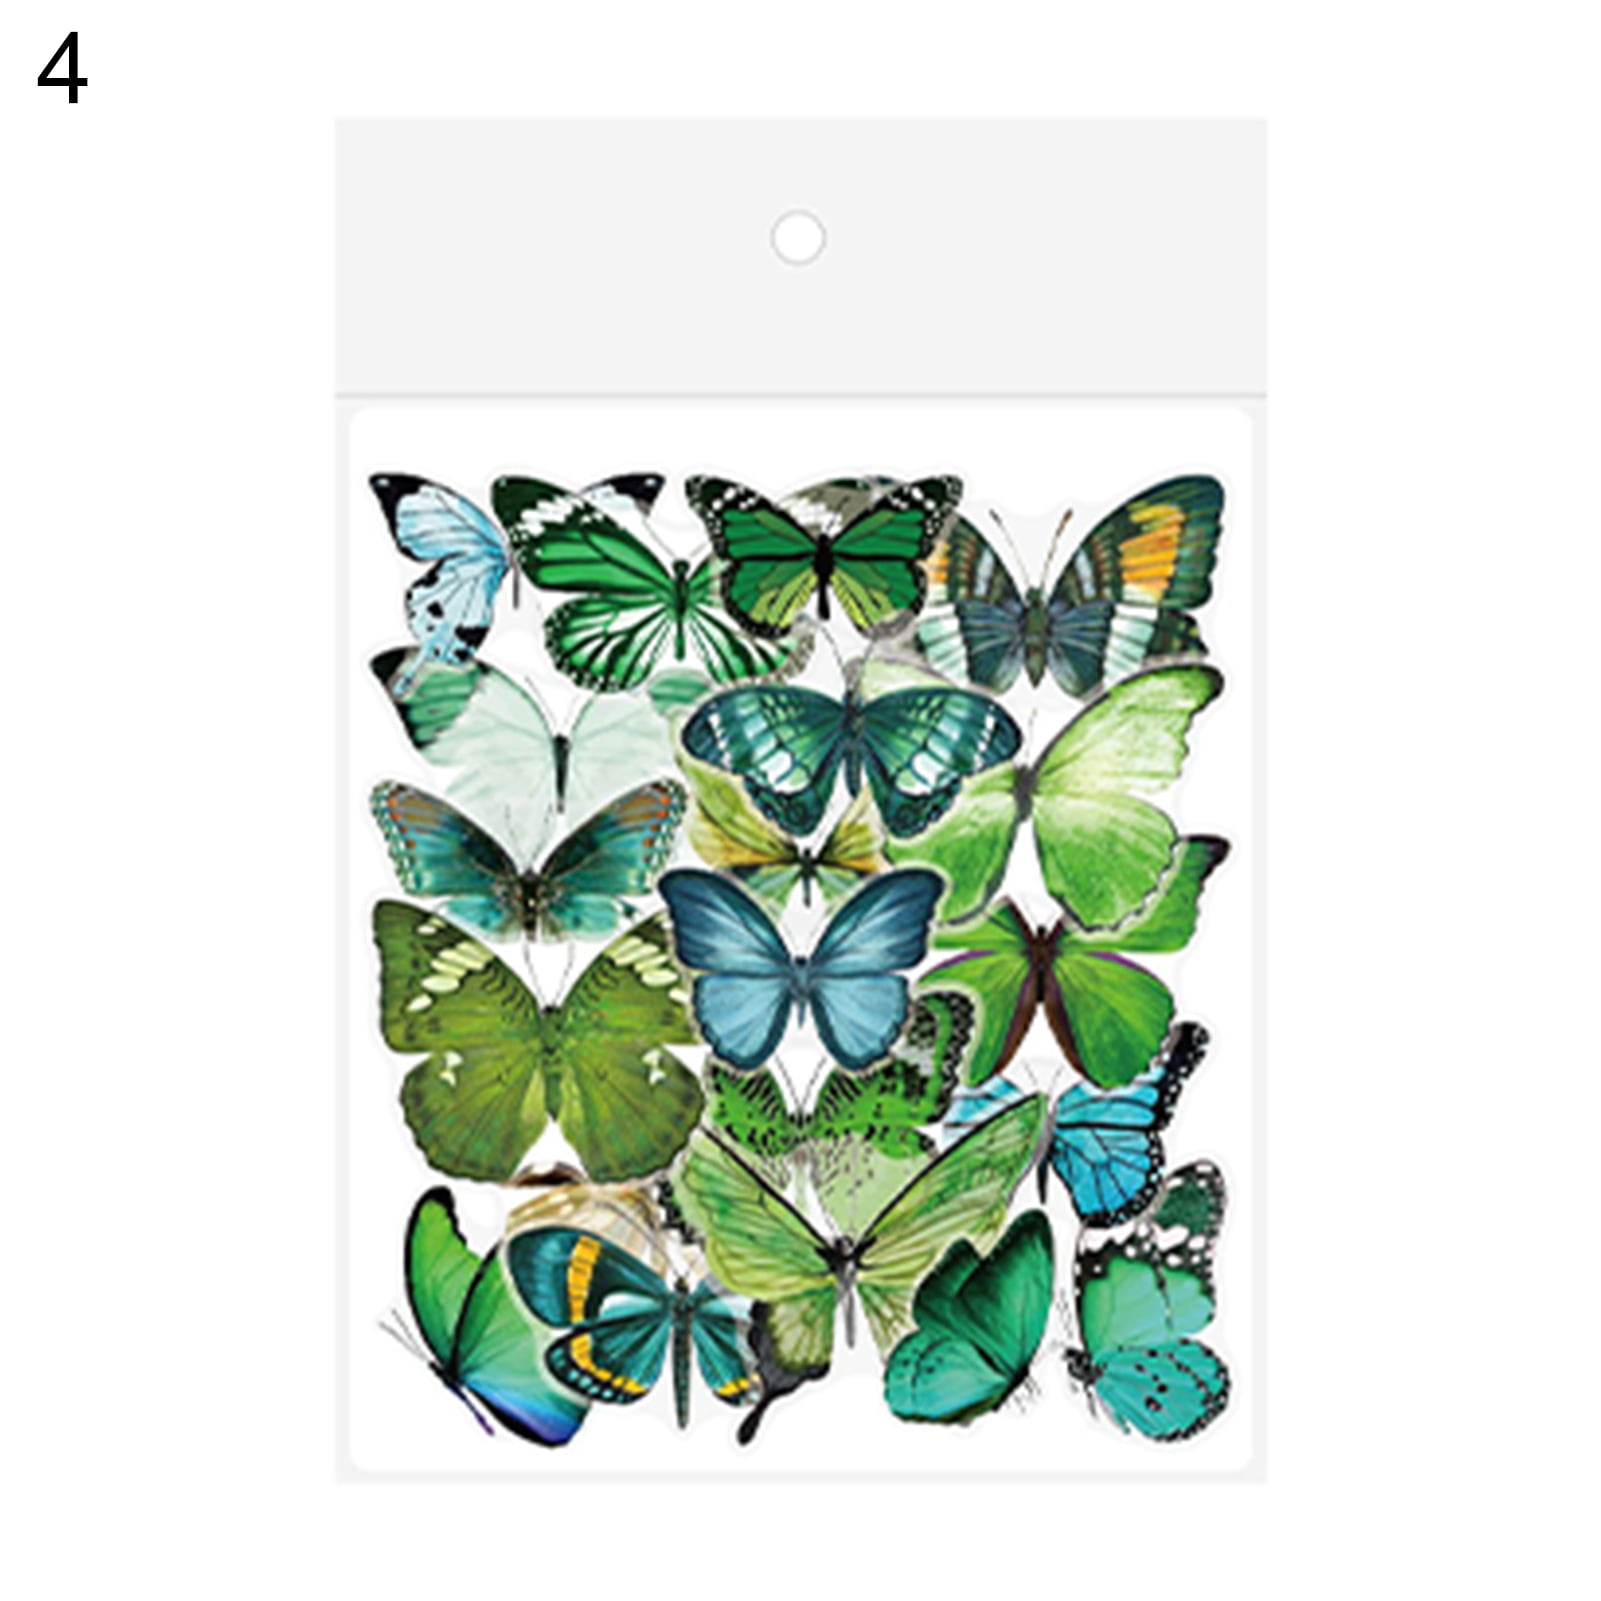 Yirtree Butterfly Stickers Set (12 Pieces) - Decorative Colorful Assorted  Butterflies Decals for Scrapbooking DIY Arts Crafts Album Bullet Journals